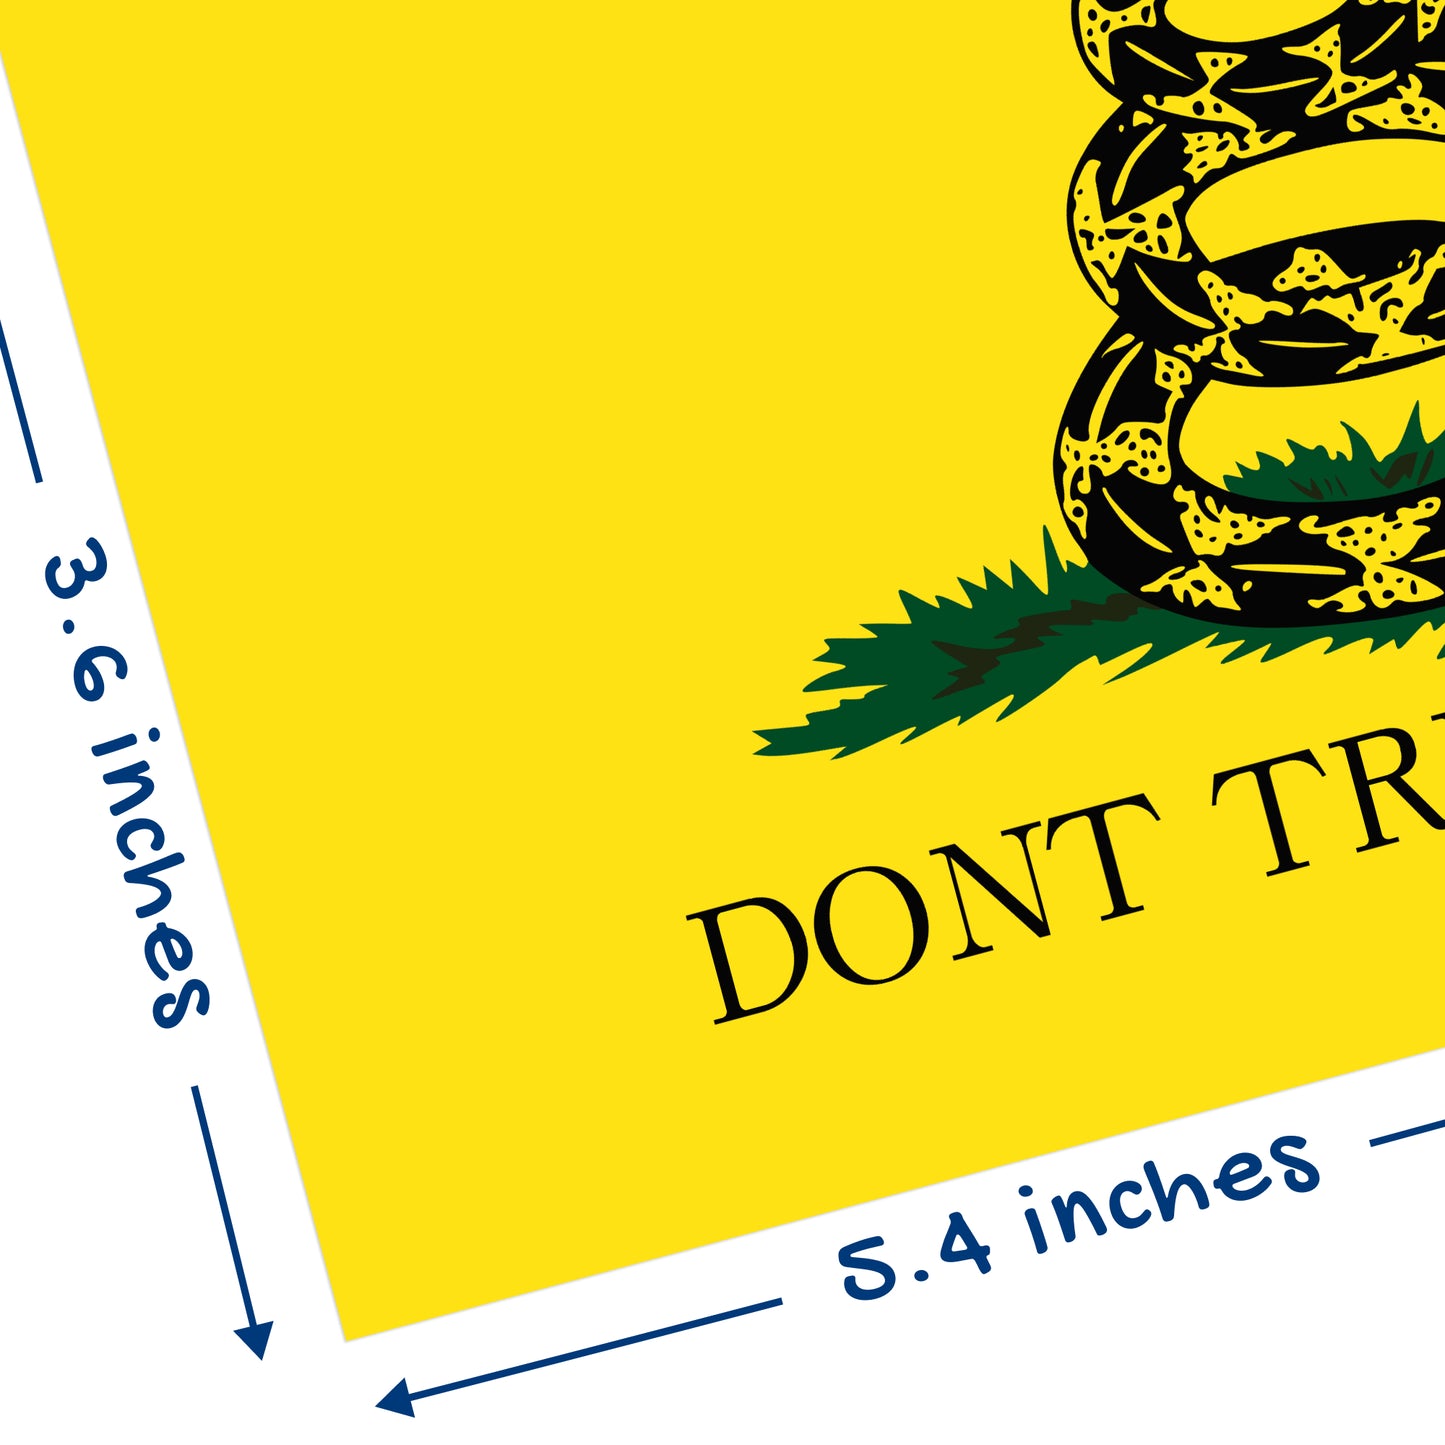 Dont Tread On Me - American Flag Decal - Gadsden Flag (Classic)